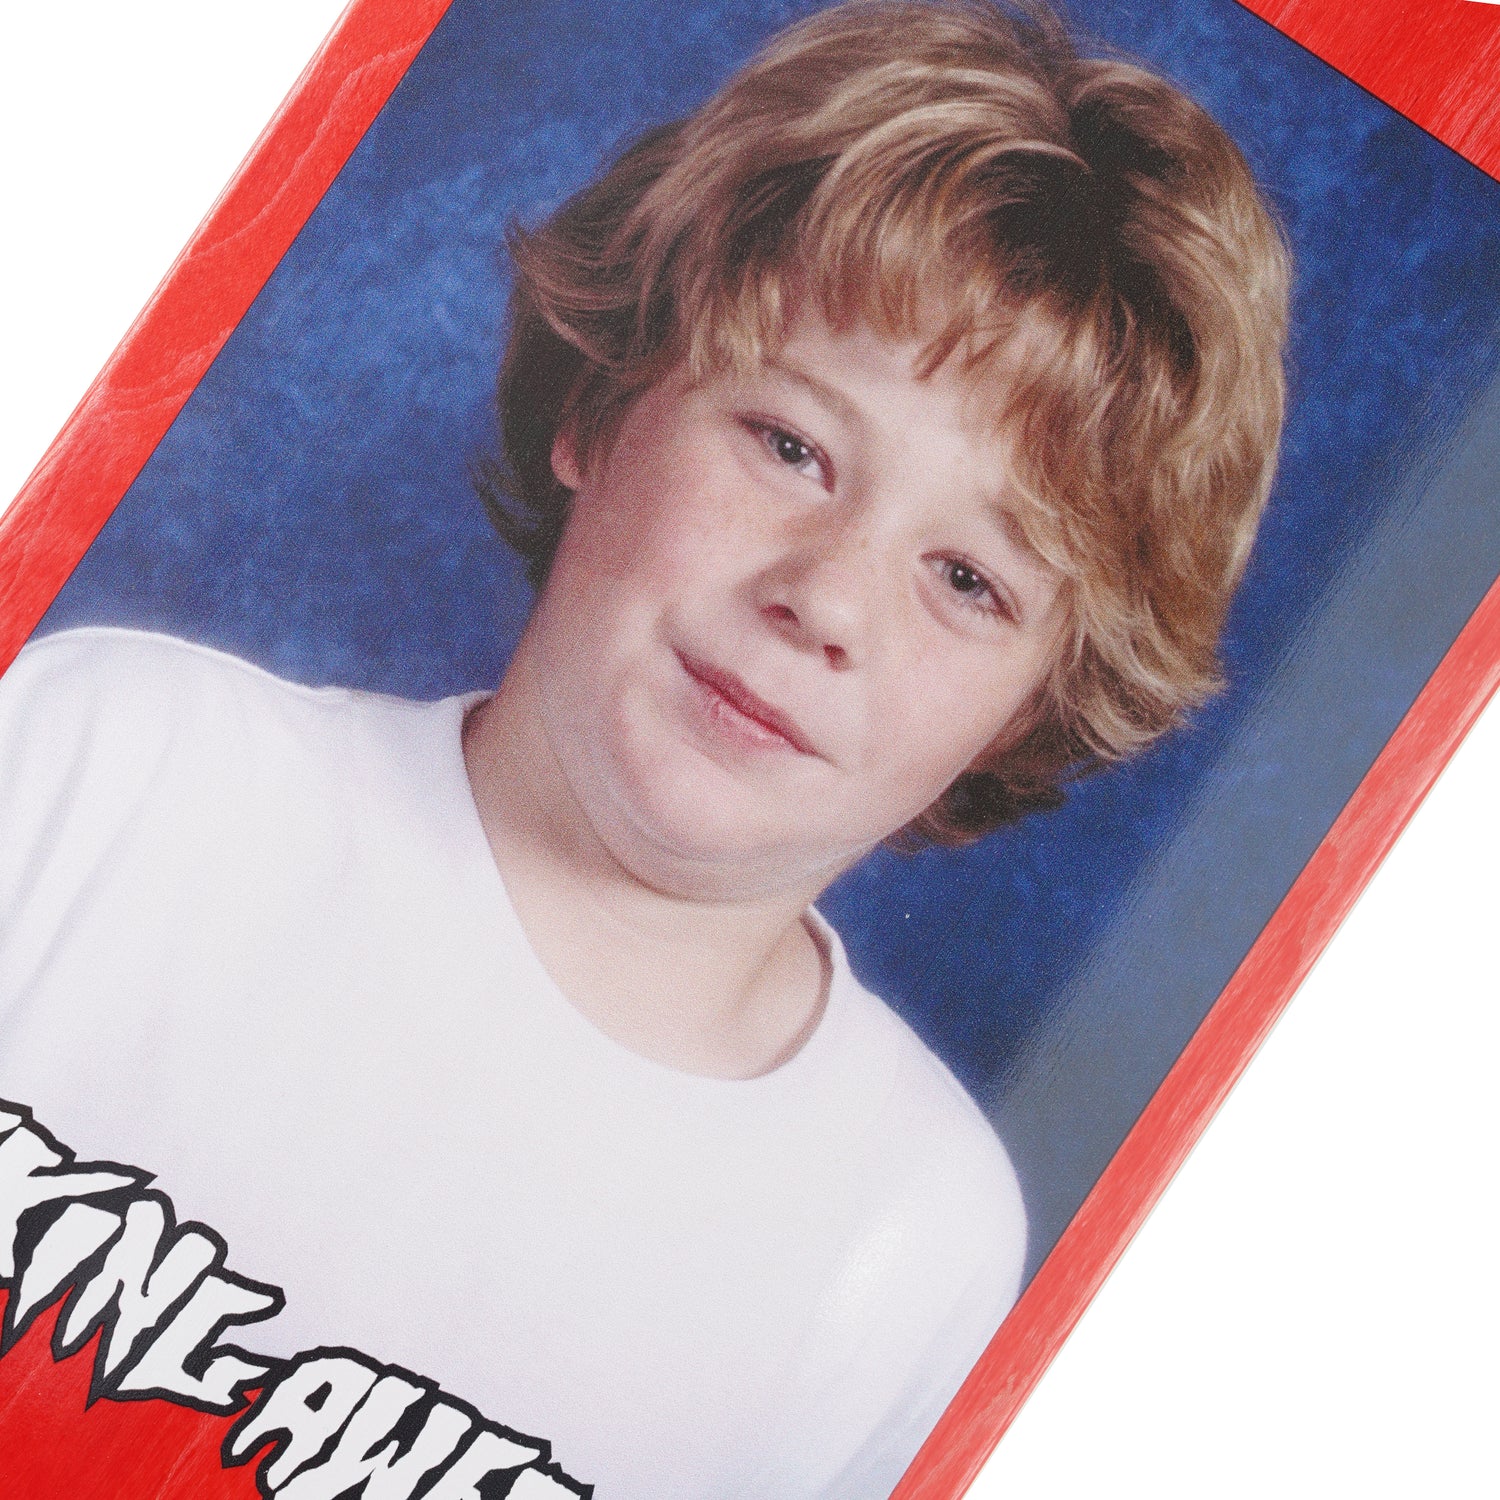 Jake Anderson 'Class Photo' Deck